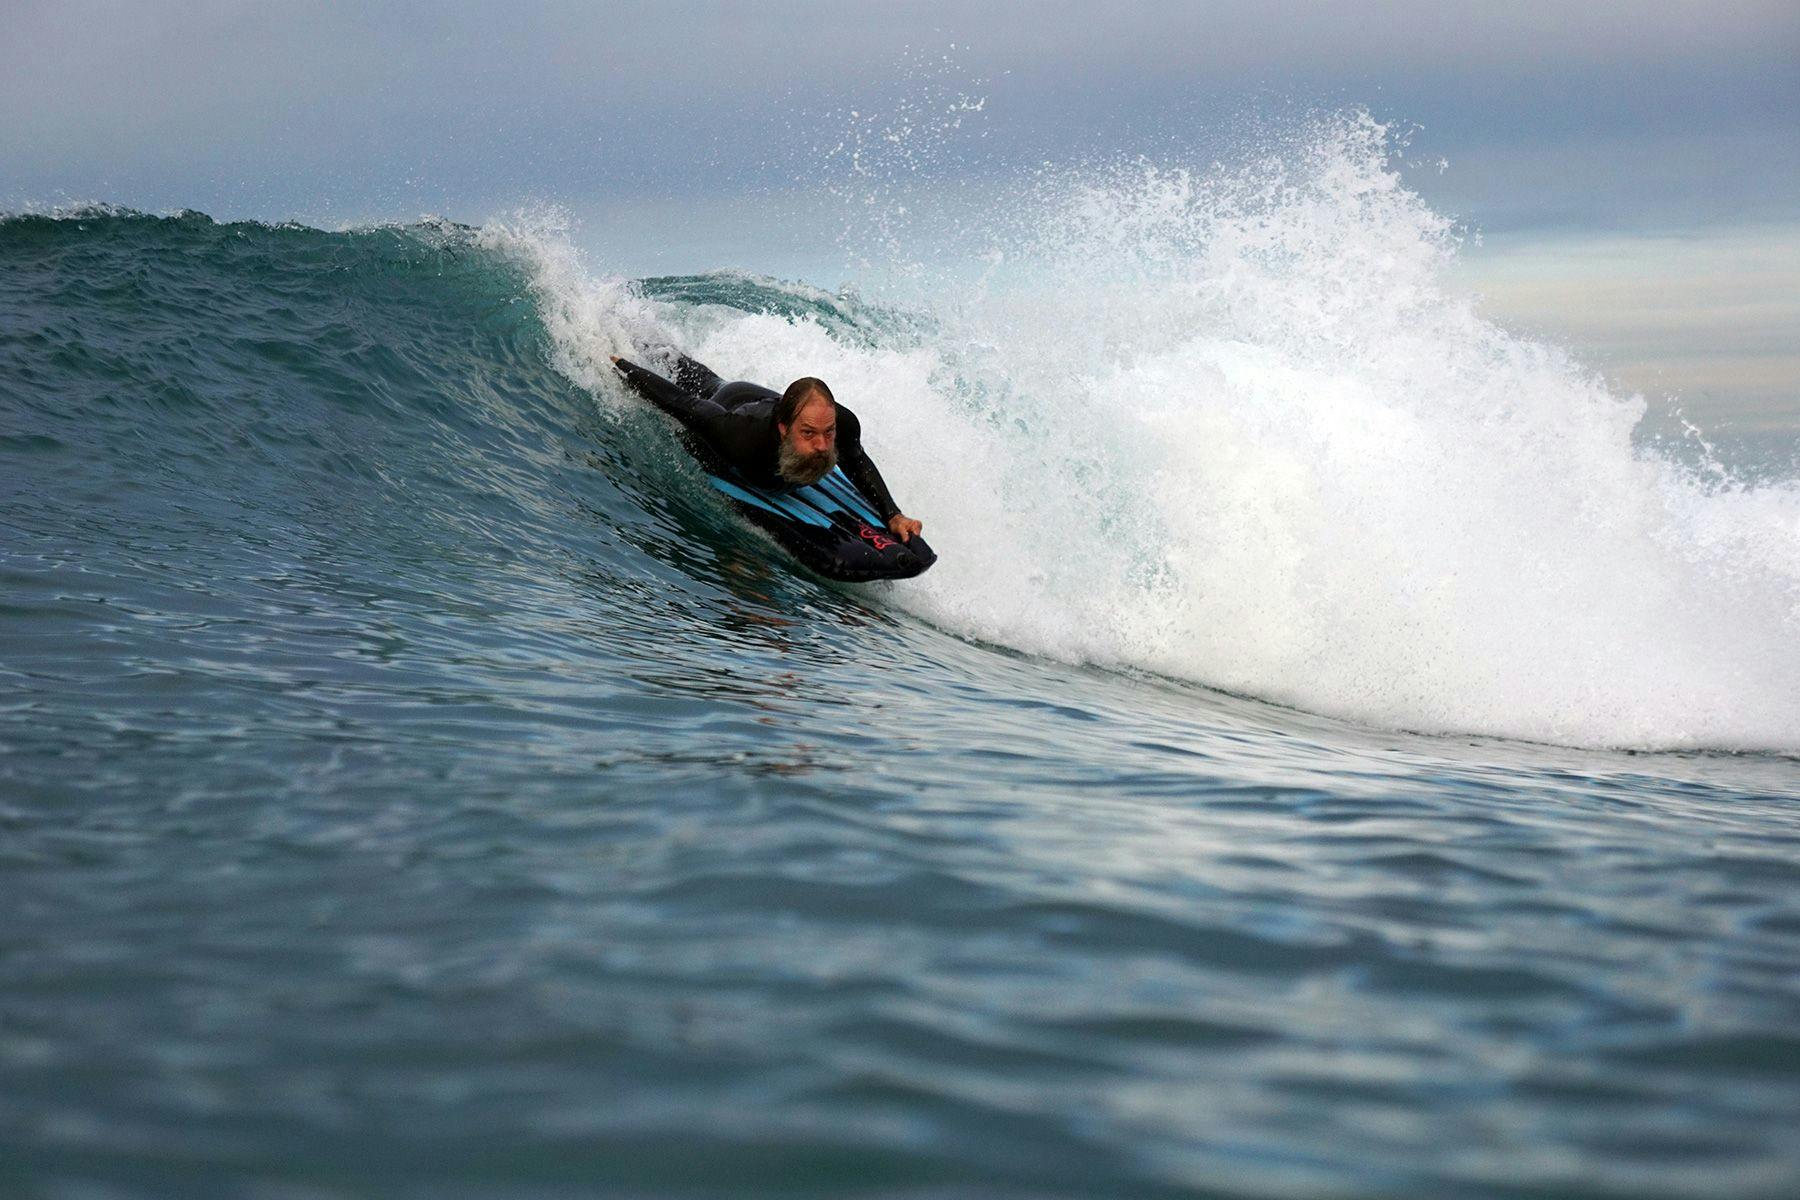 James Sowell riding a wave in Southern California. Photographed by Chad Stickney/HCW Camera Waterhousings.